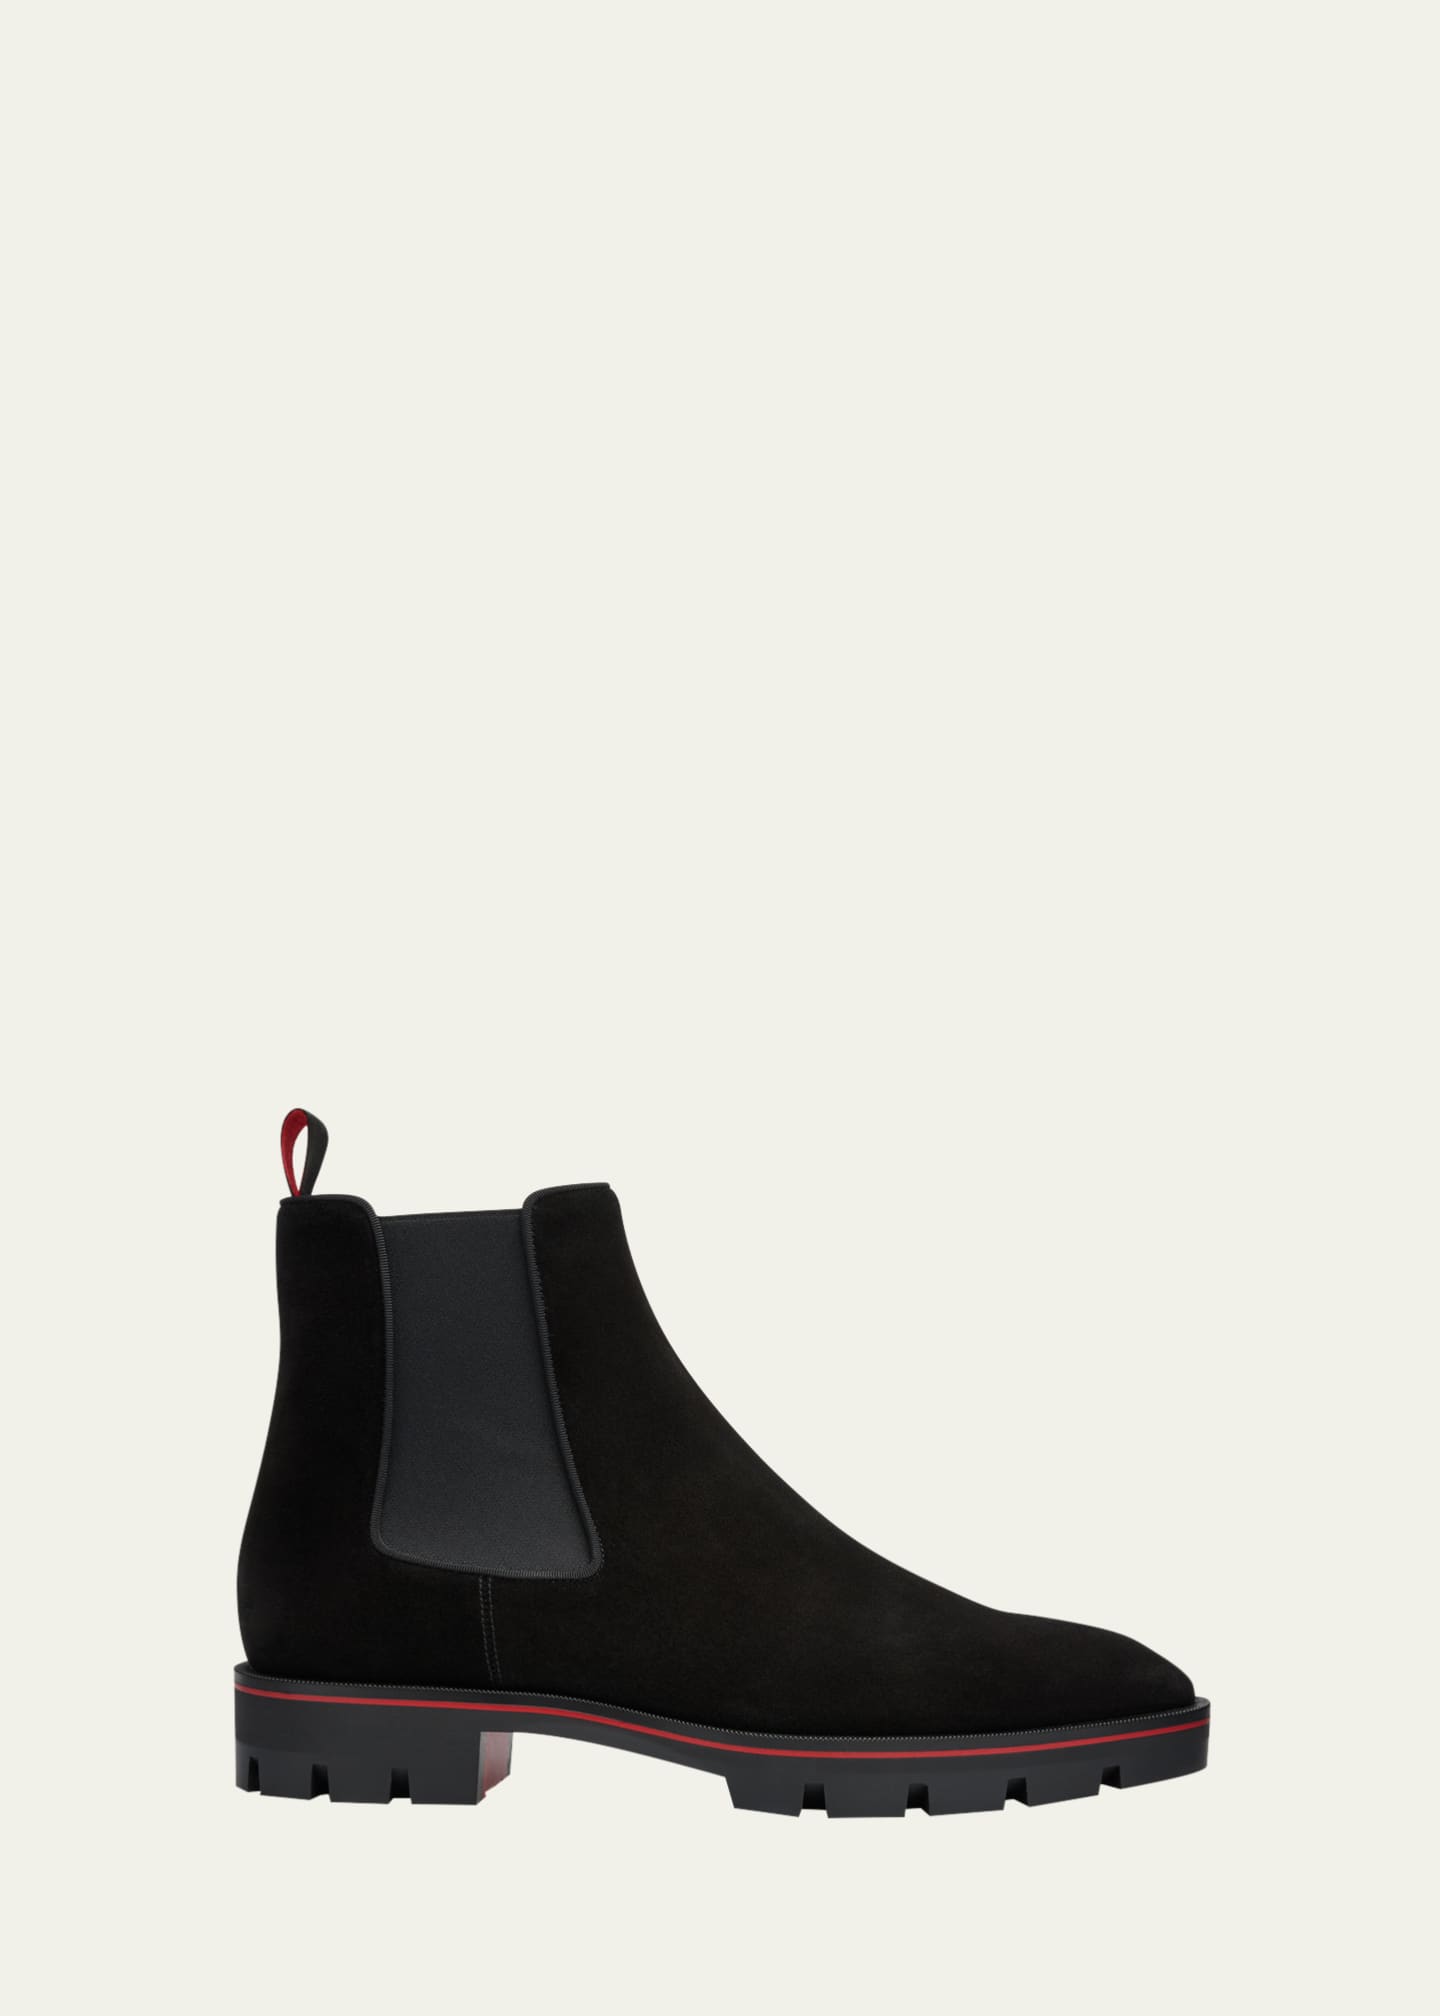 Christian Louboutin Leather Studded Accents Chelsea Boots - Black